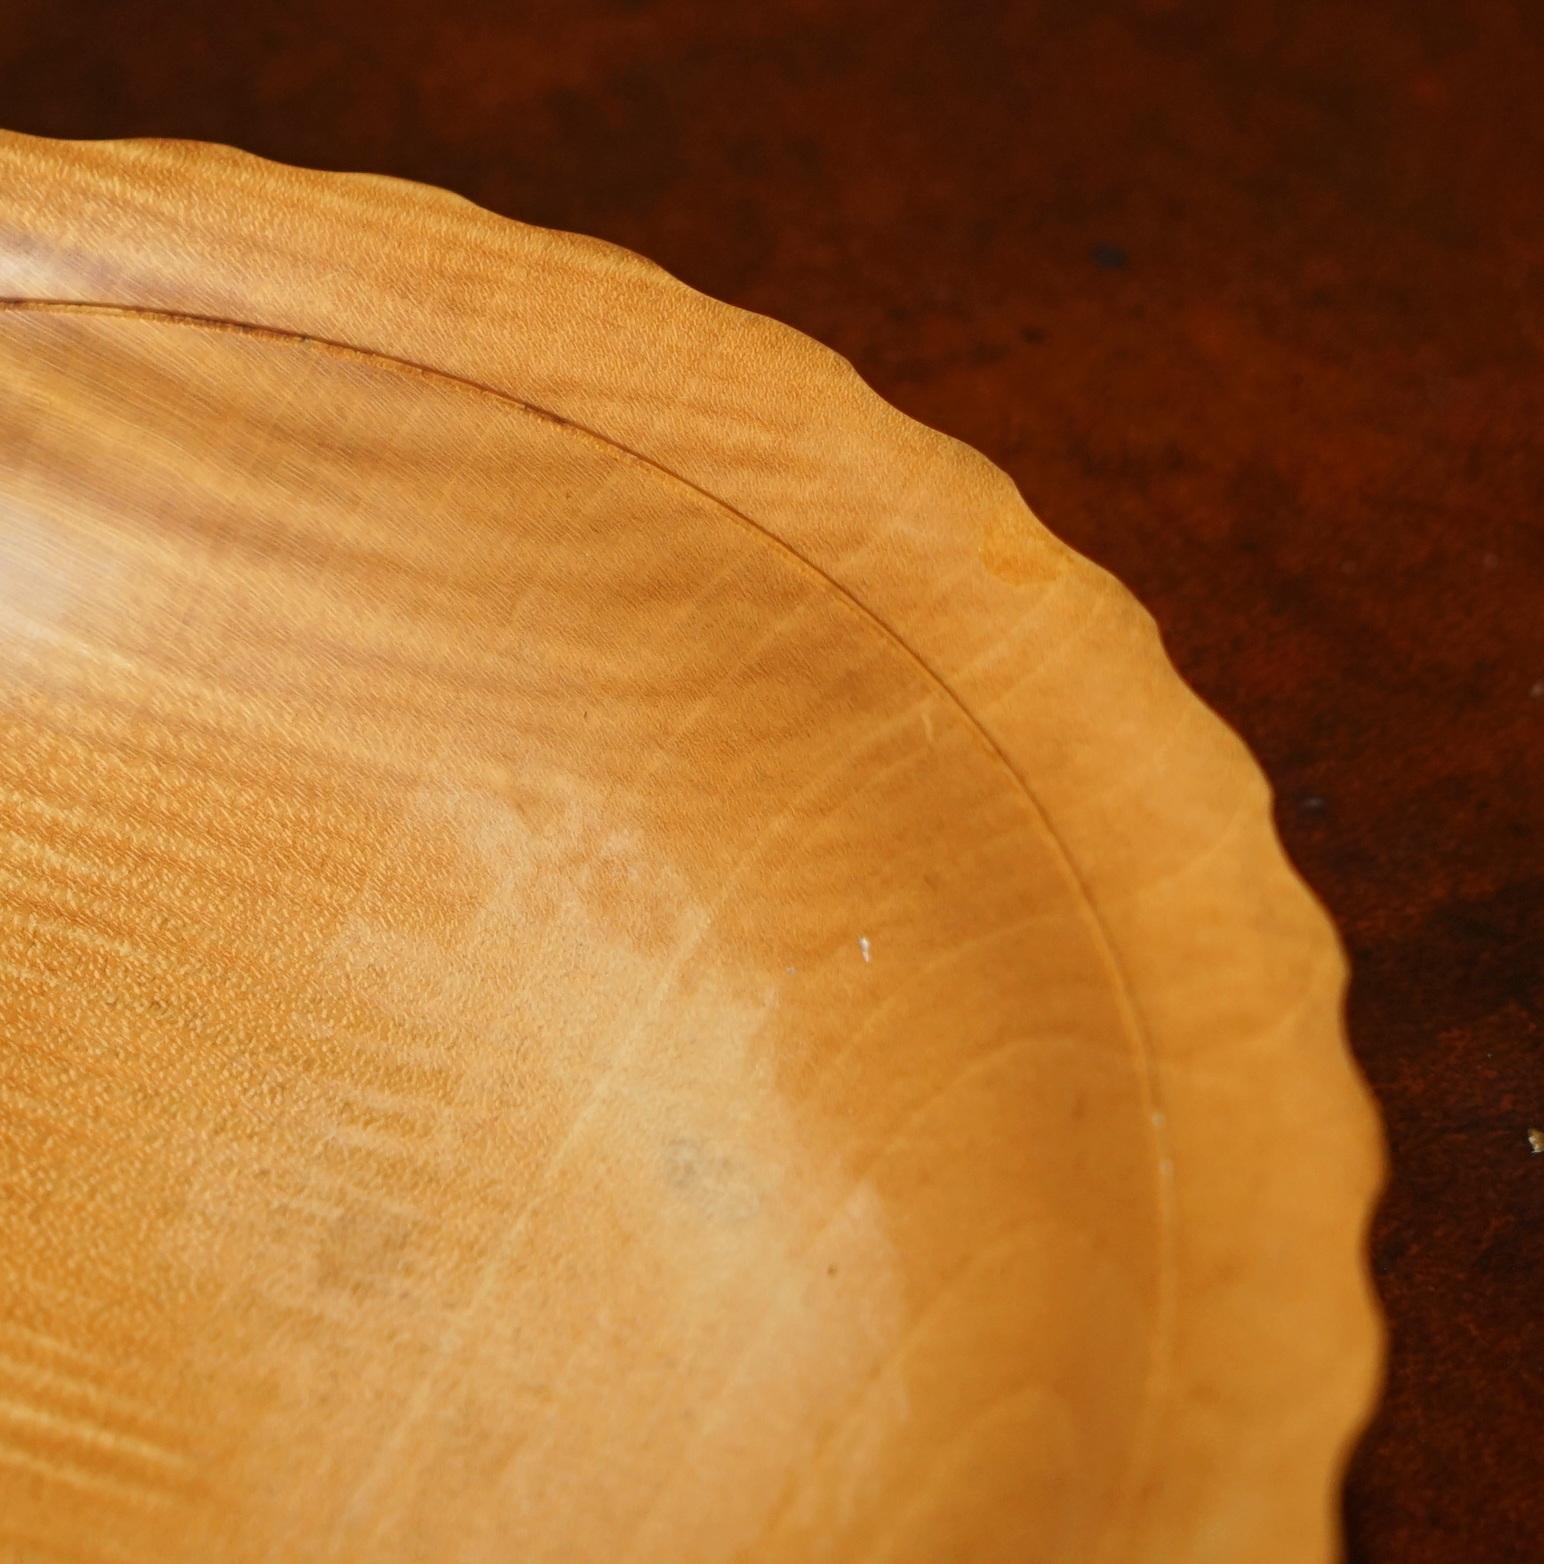 20th Century HAND MADE ViNTAGE RIPPLE SYCAMORE FRUIT BOWL SIGNED TO THE BASE BOB FRENCH For Sale